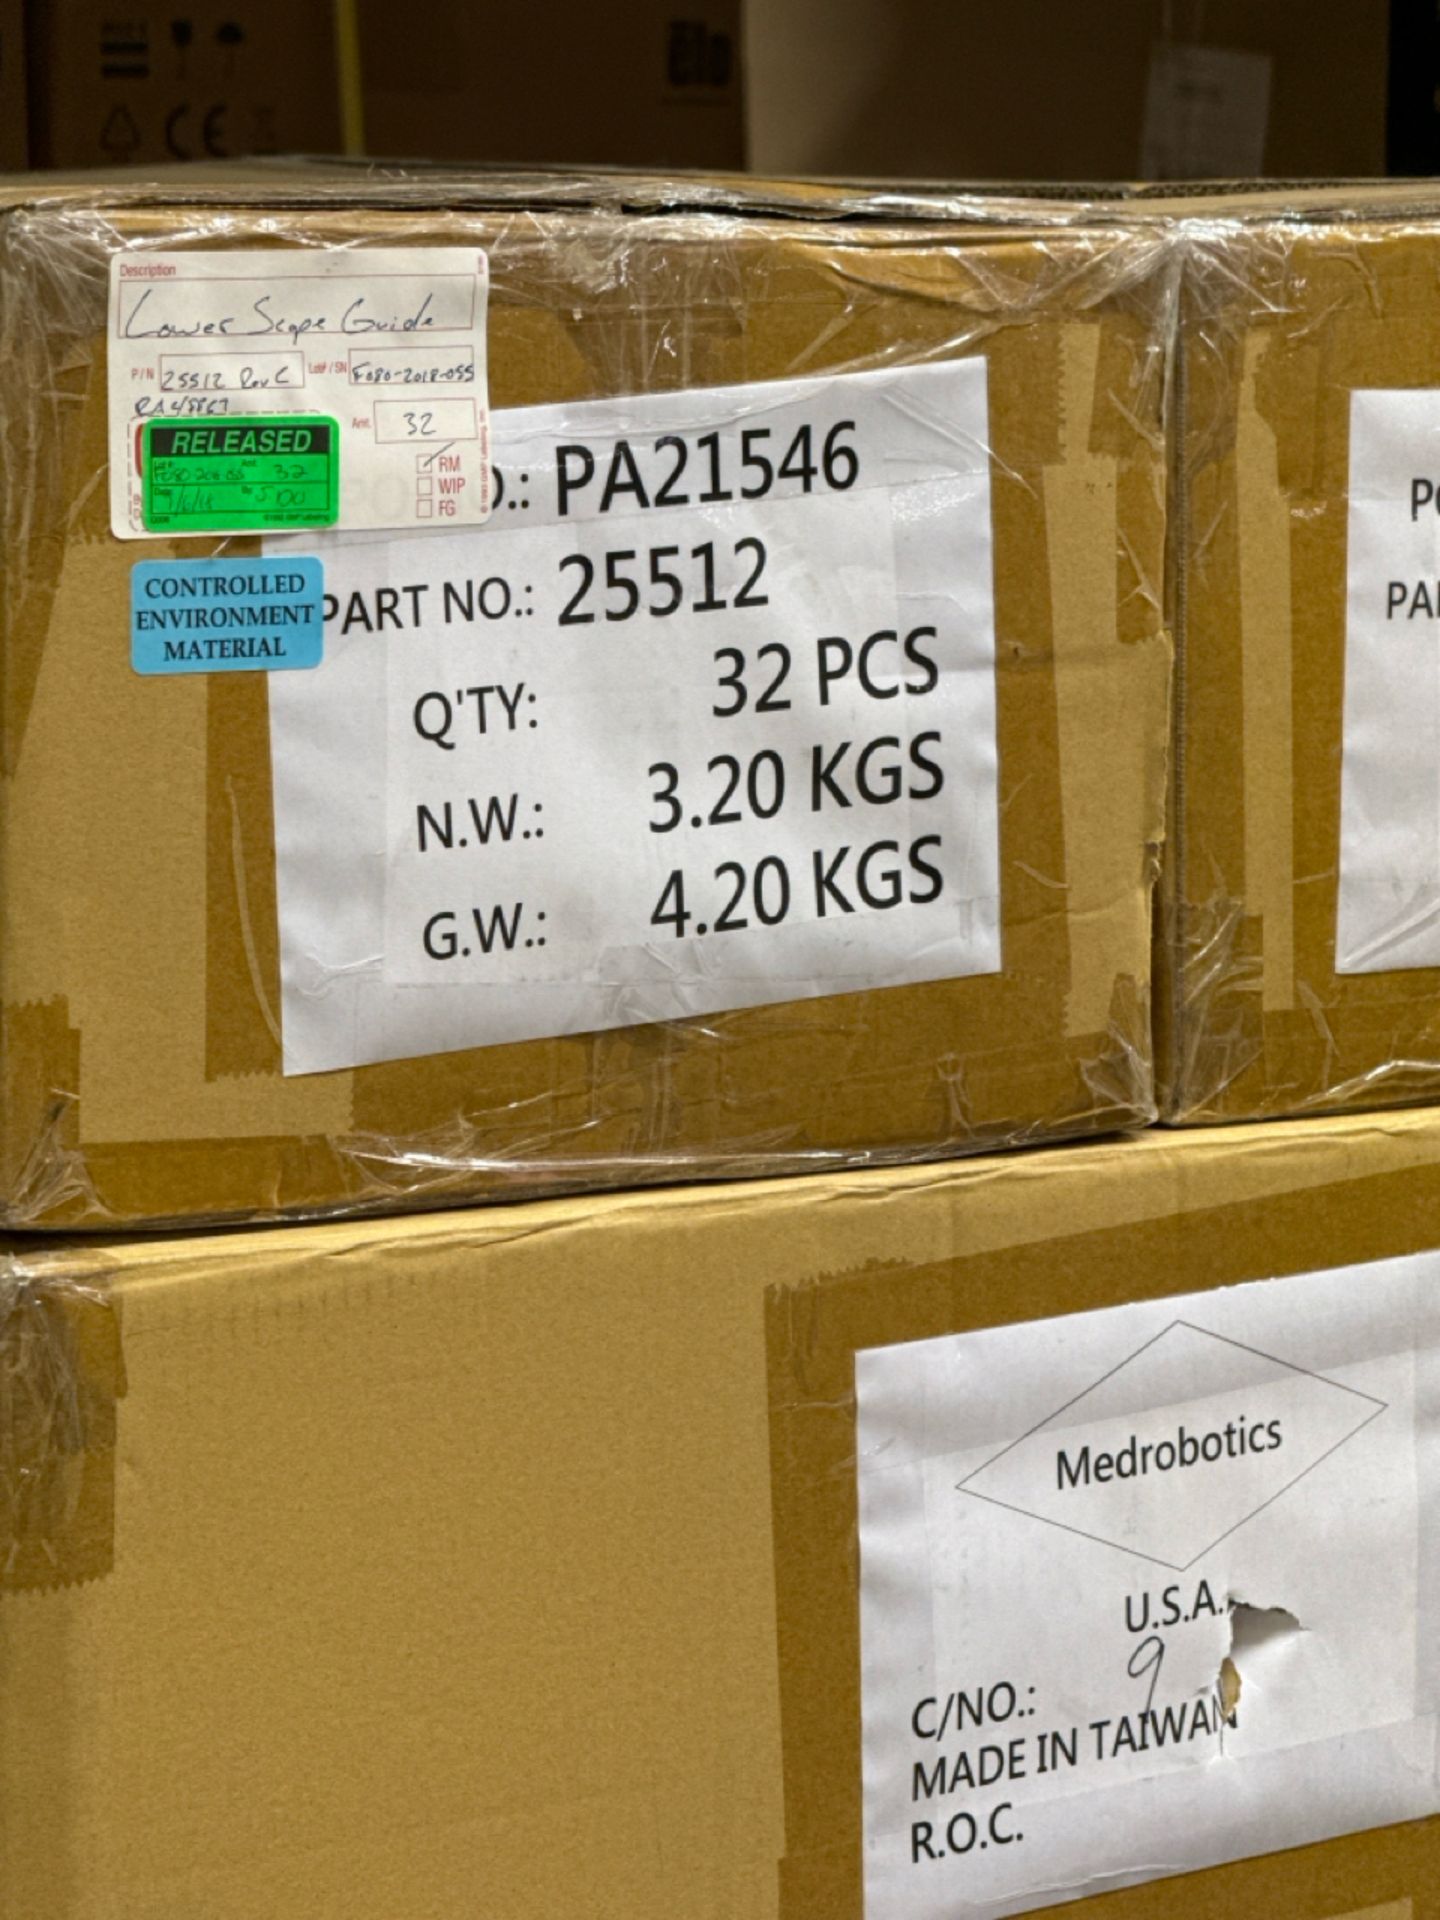 Contents of Center Pallet Racking - Image 53 of 68